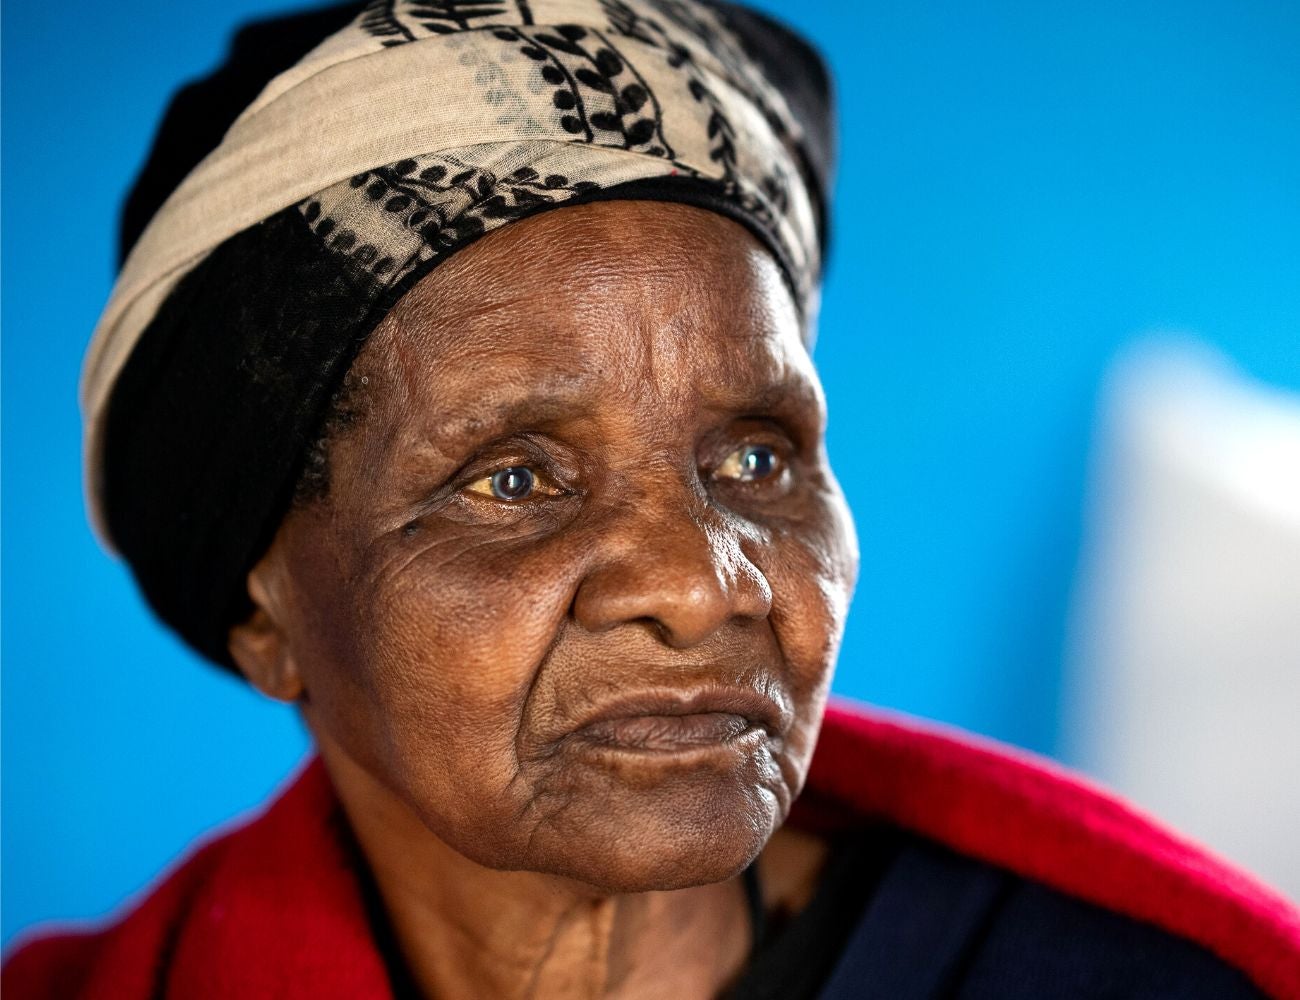 cataract surgery in South Africa